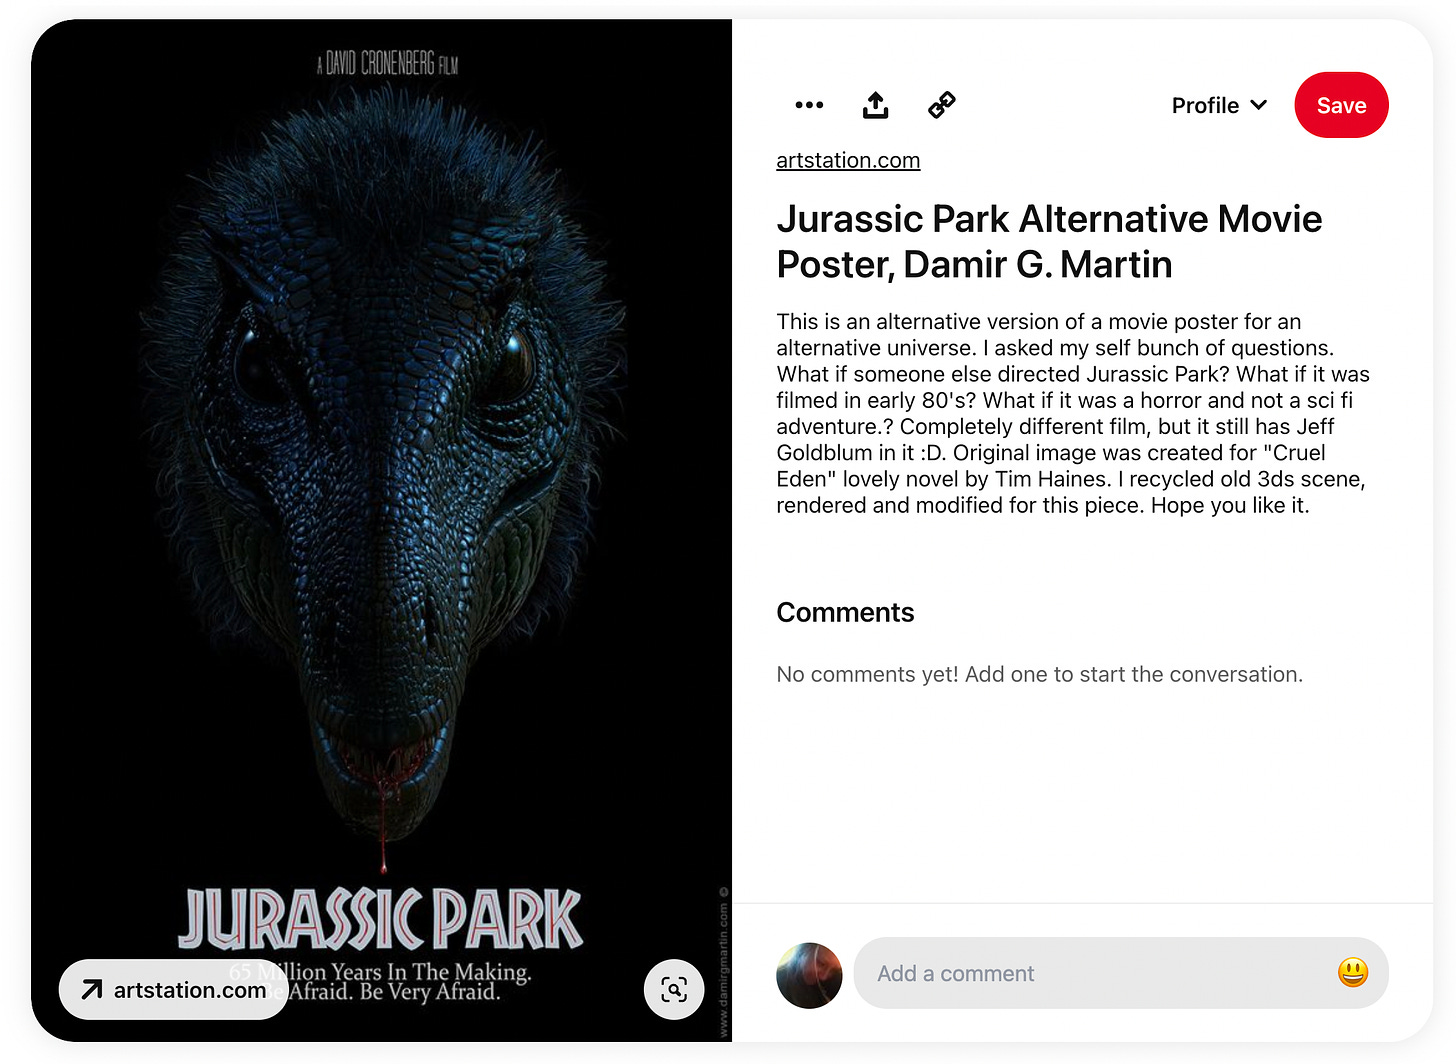 Jurassic Park – News, Research and Analysis – The Conversation – page 1